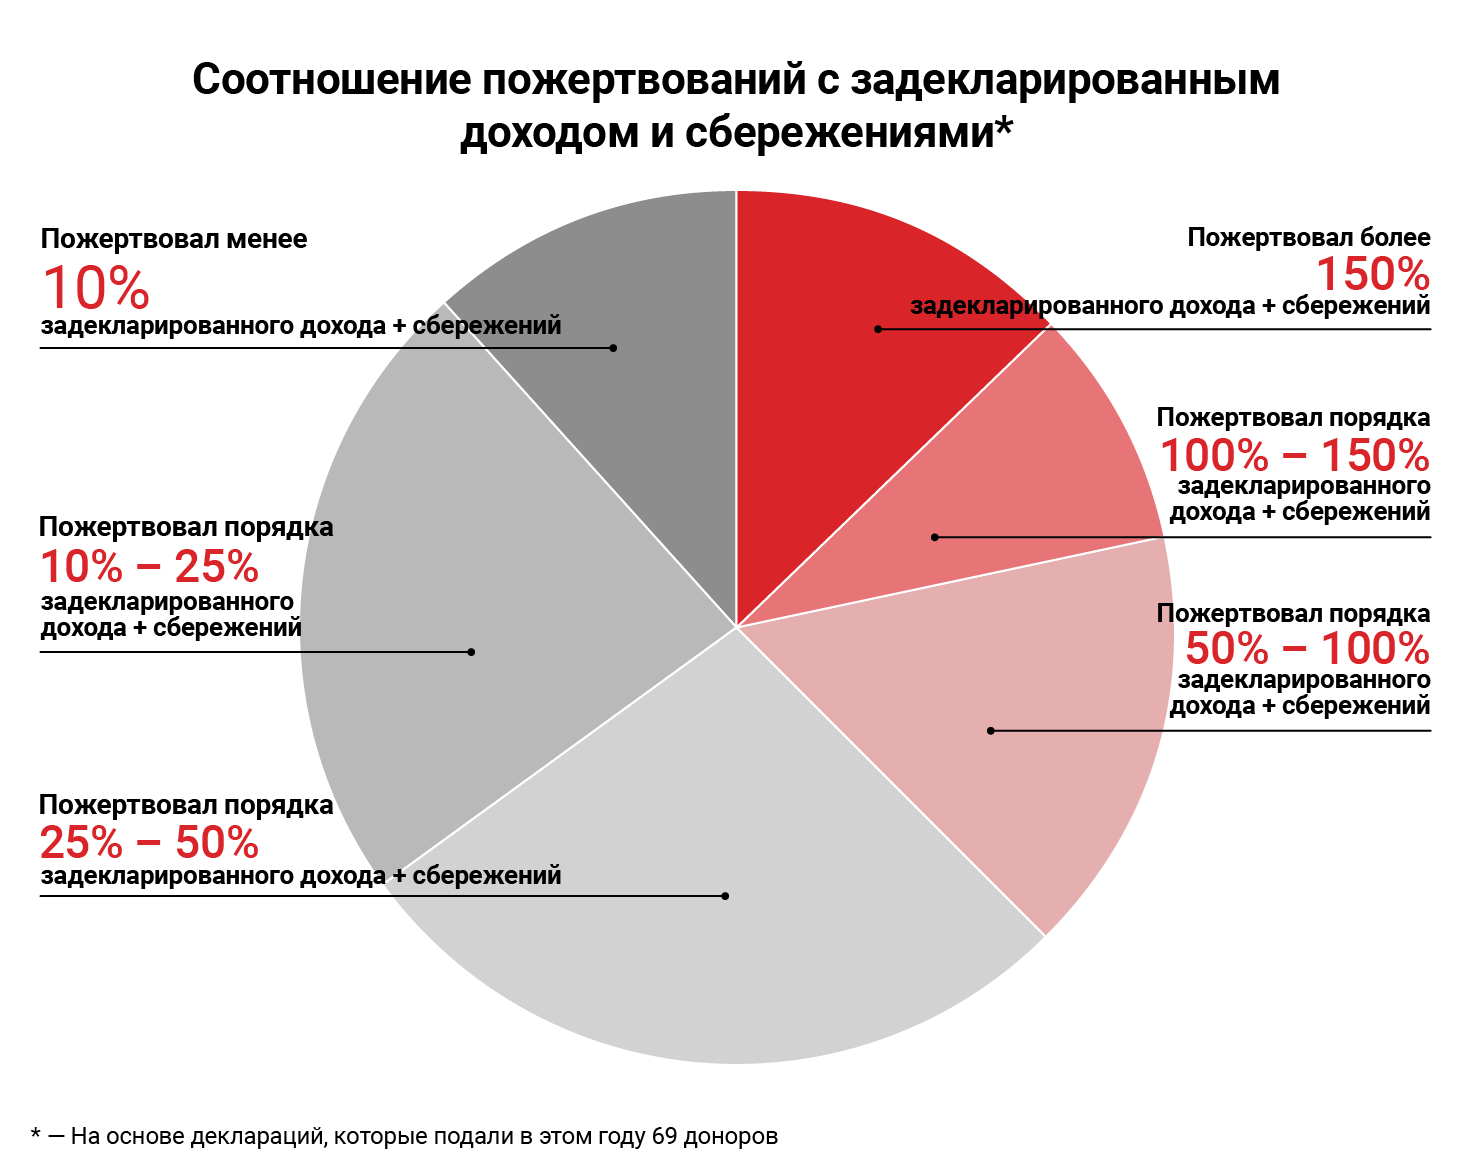 investigations/donors-declared-income-chart-rus.png